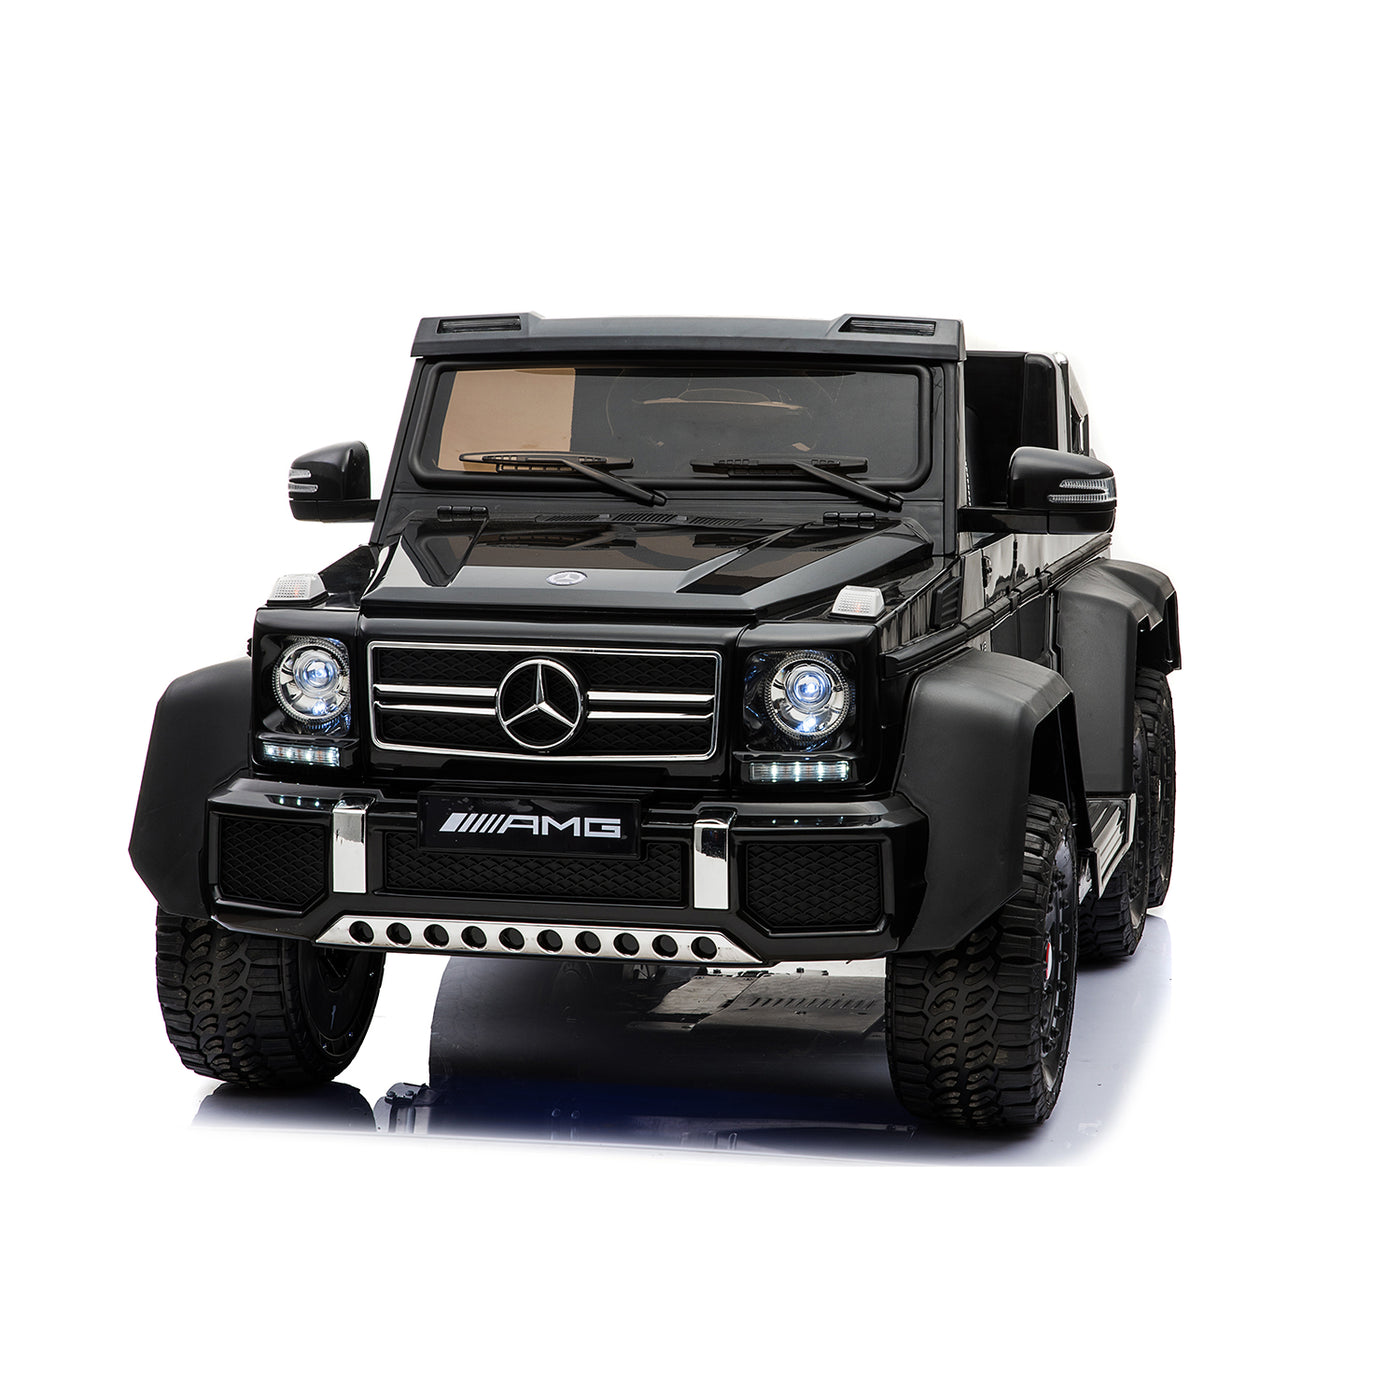 Licensed Mercedes Benz AMG G63 6x6 Electric Ride On Car for Kids with 2.4G Remote Control, 12V 6 Motors, Parent Seat, Openable Doors, Leather Seat, USB MP3 Player, LED bottom and Wheel Light -Black